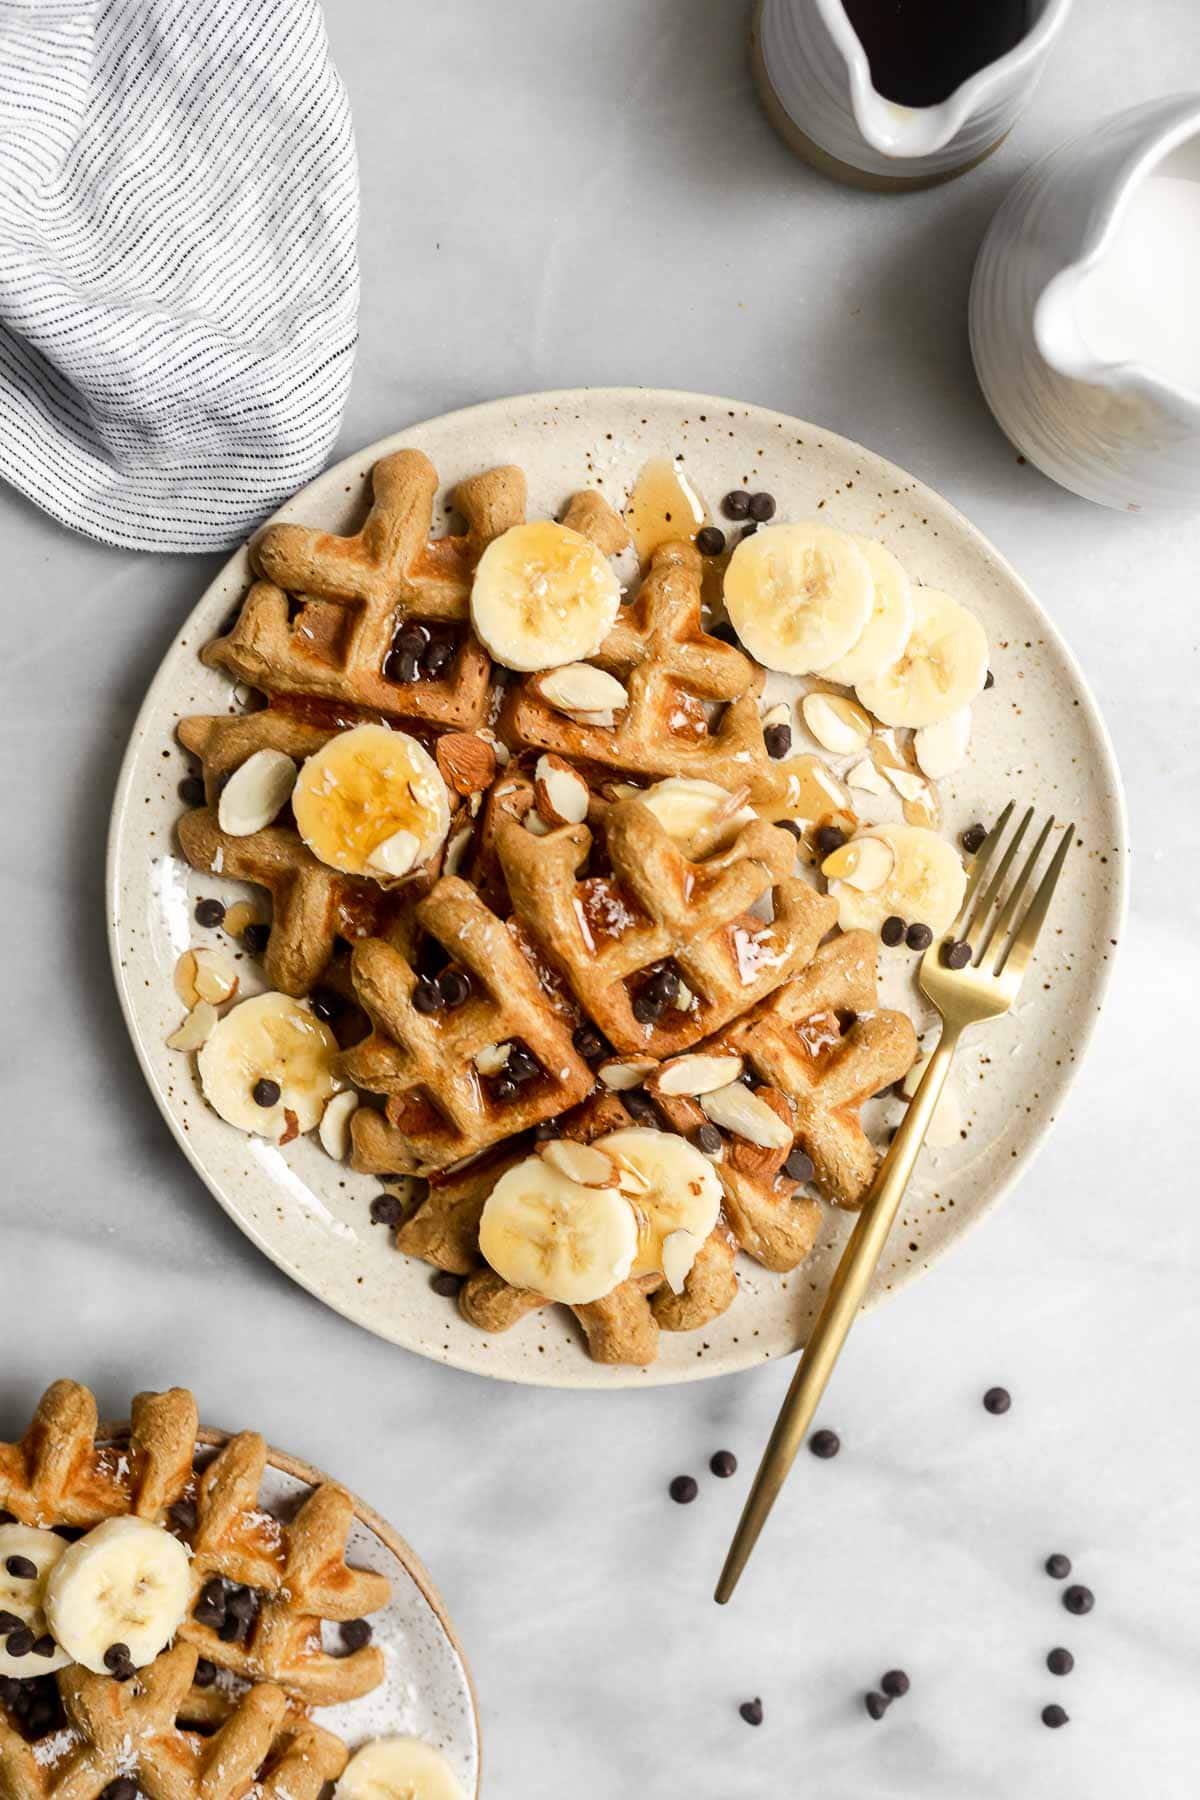 Peanut butter waffles with banana slices and chocolate chips. 